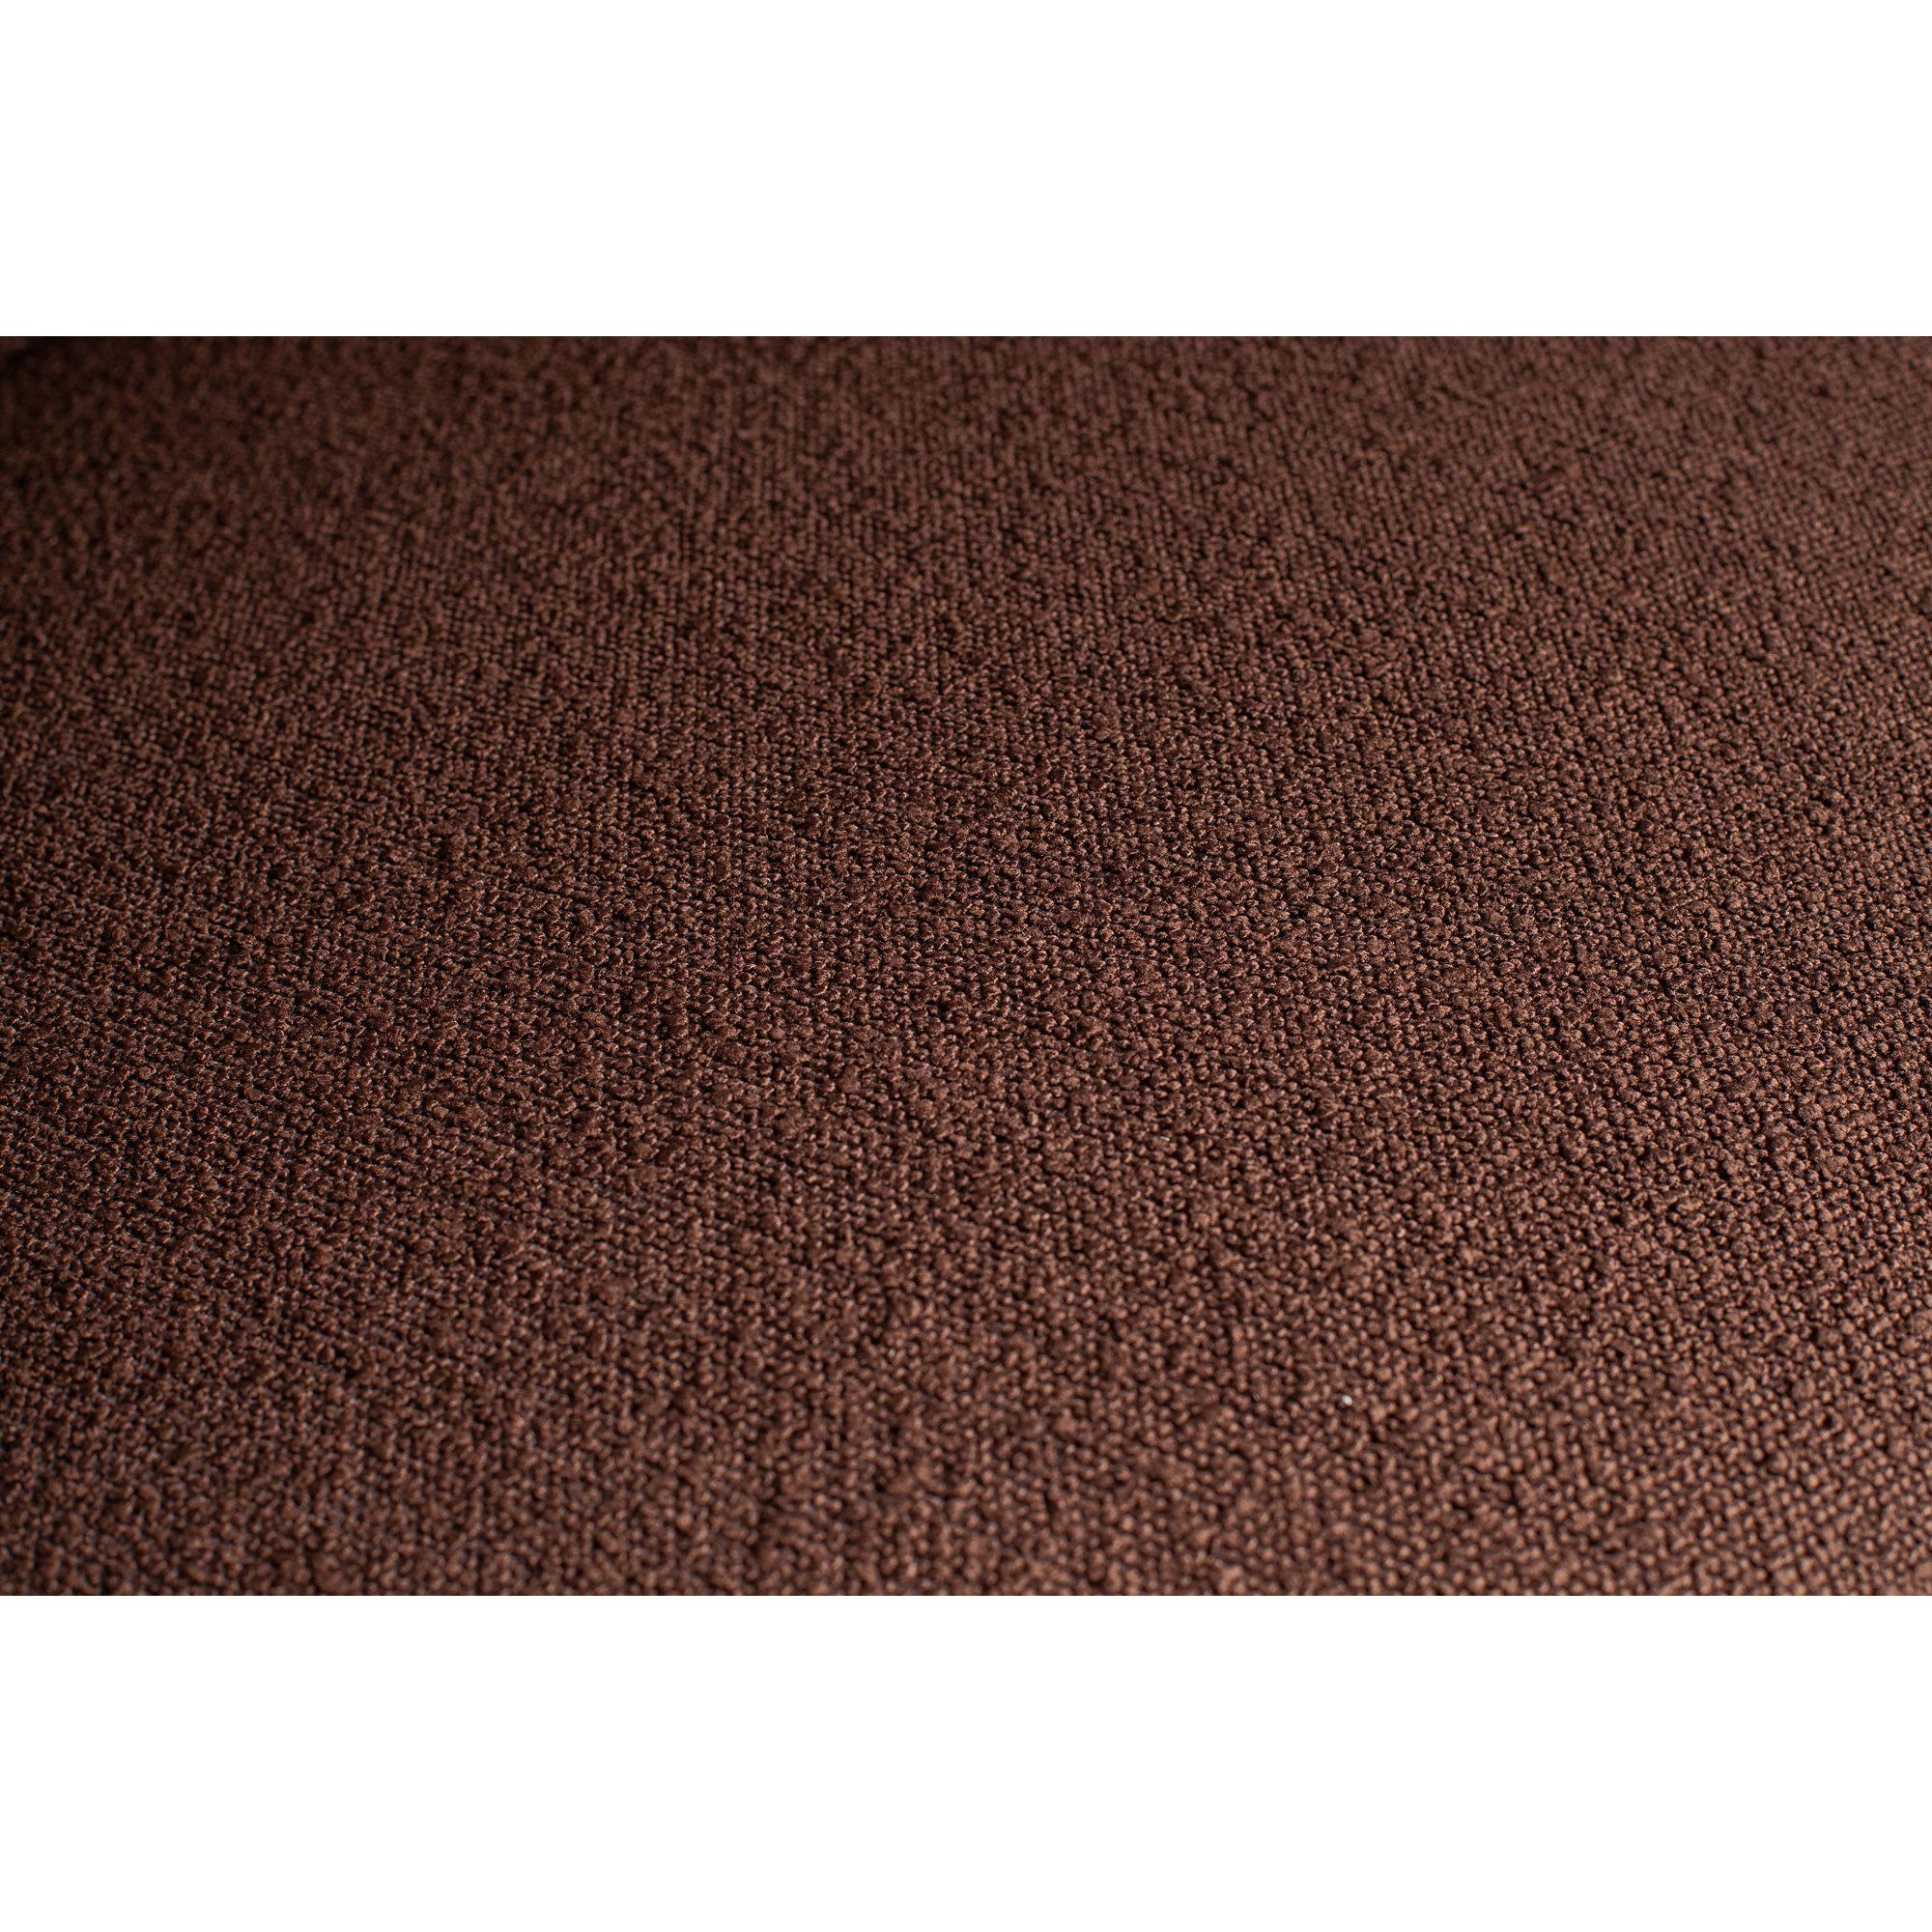  Statement 4-pers Sofa 280 cm Boucle - Coffee fra BePureHome i Boucle (Varenr: 378657-K)